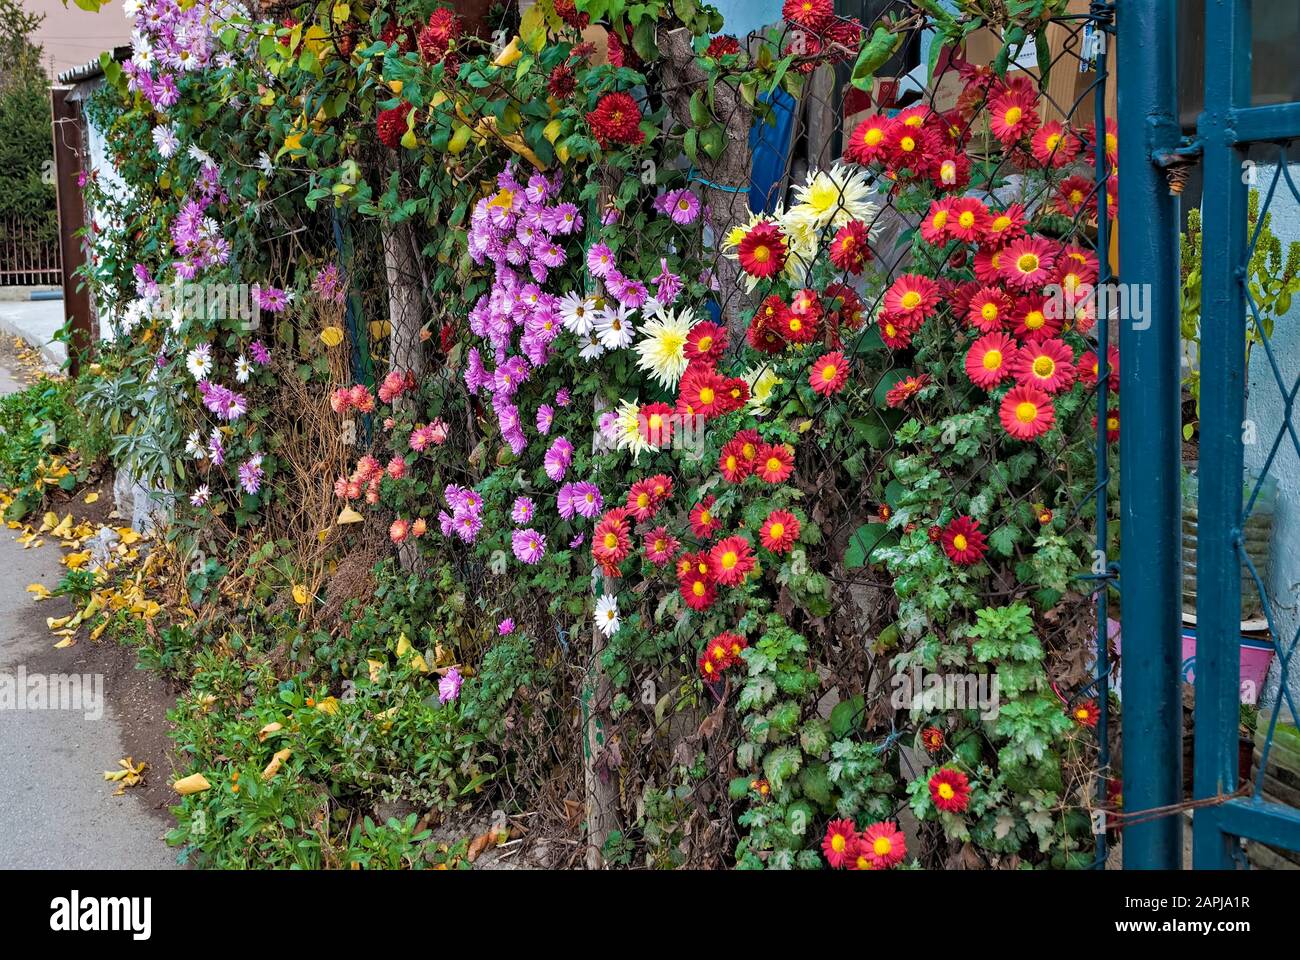 Garden Flowers on the fence; Stock Photo